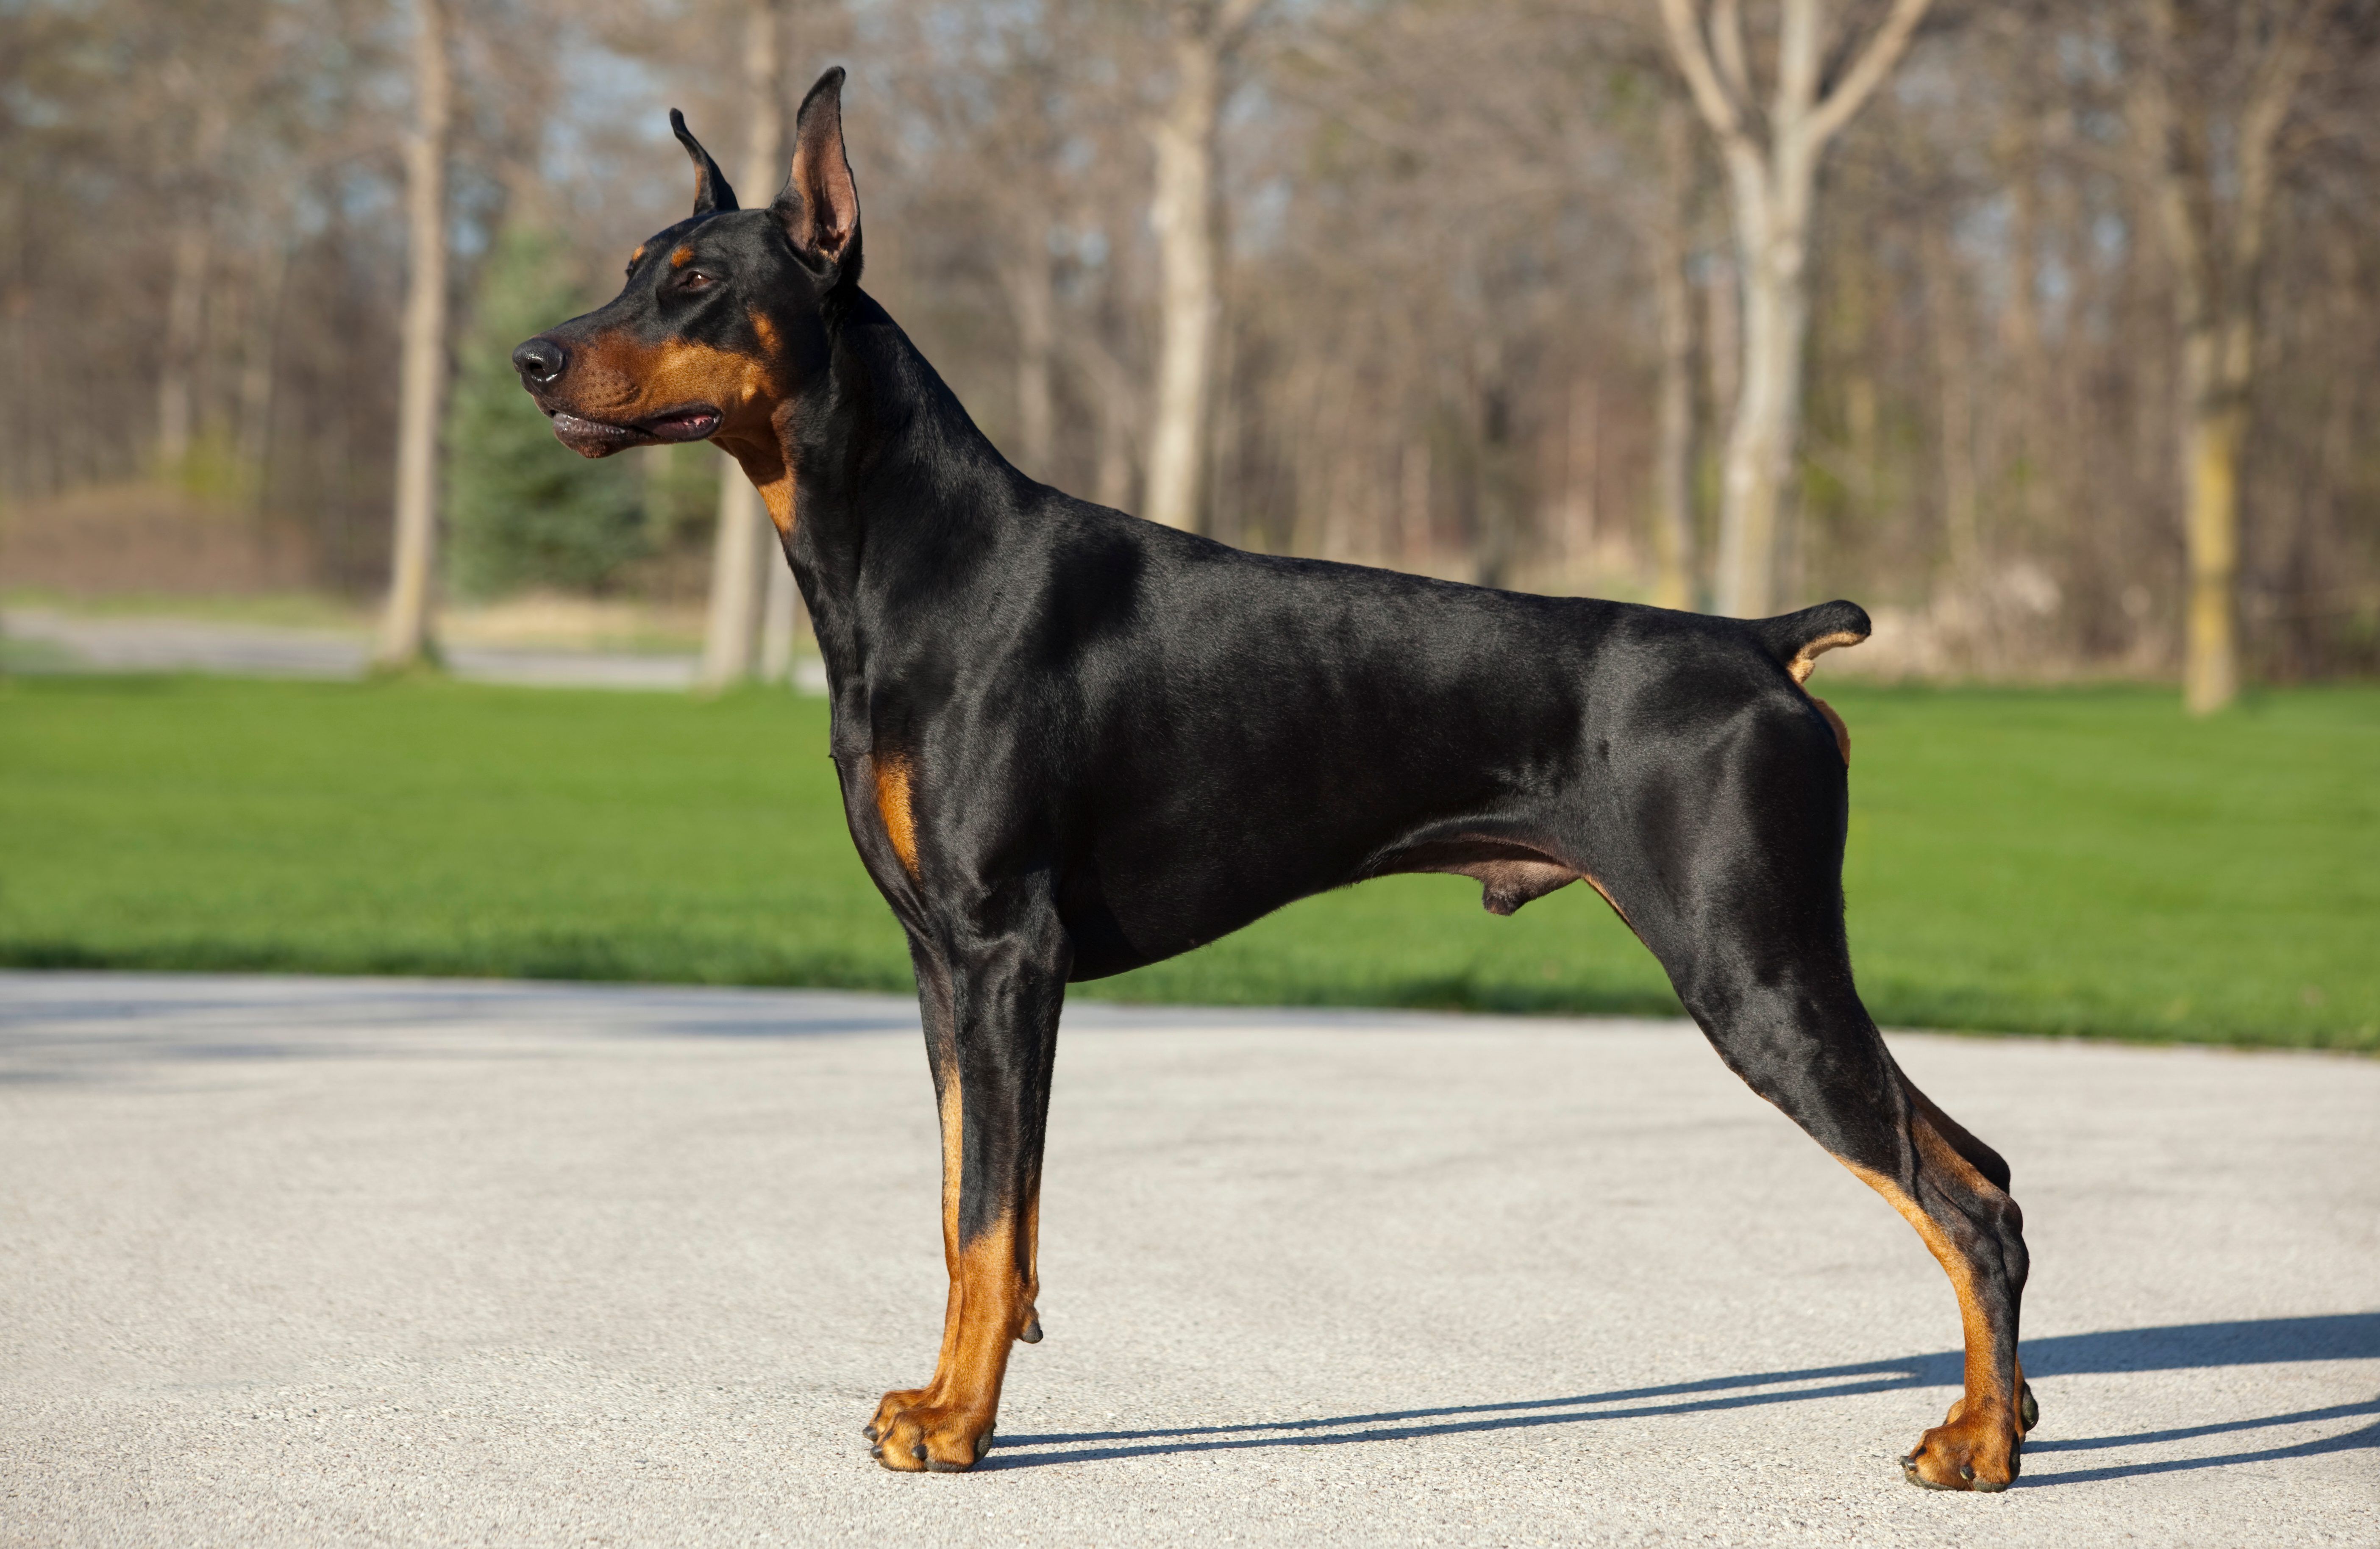 The Best Guard Dog Breeds for Protection. Reader's Digest